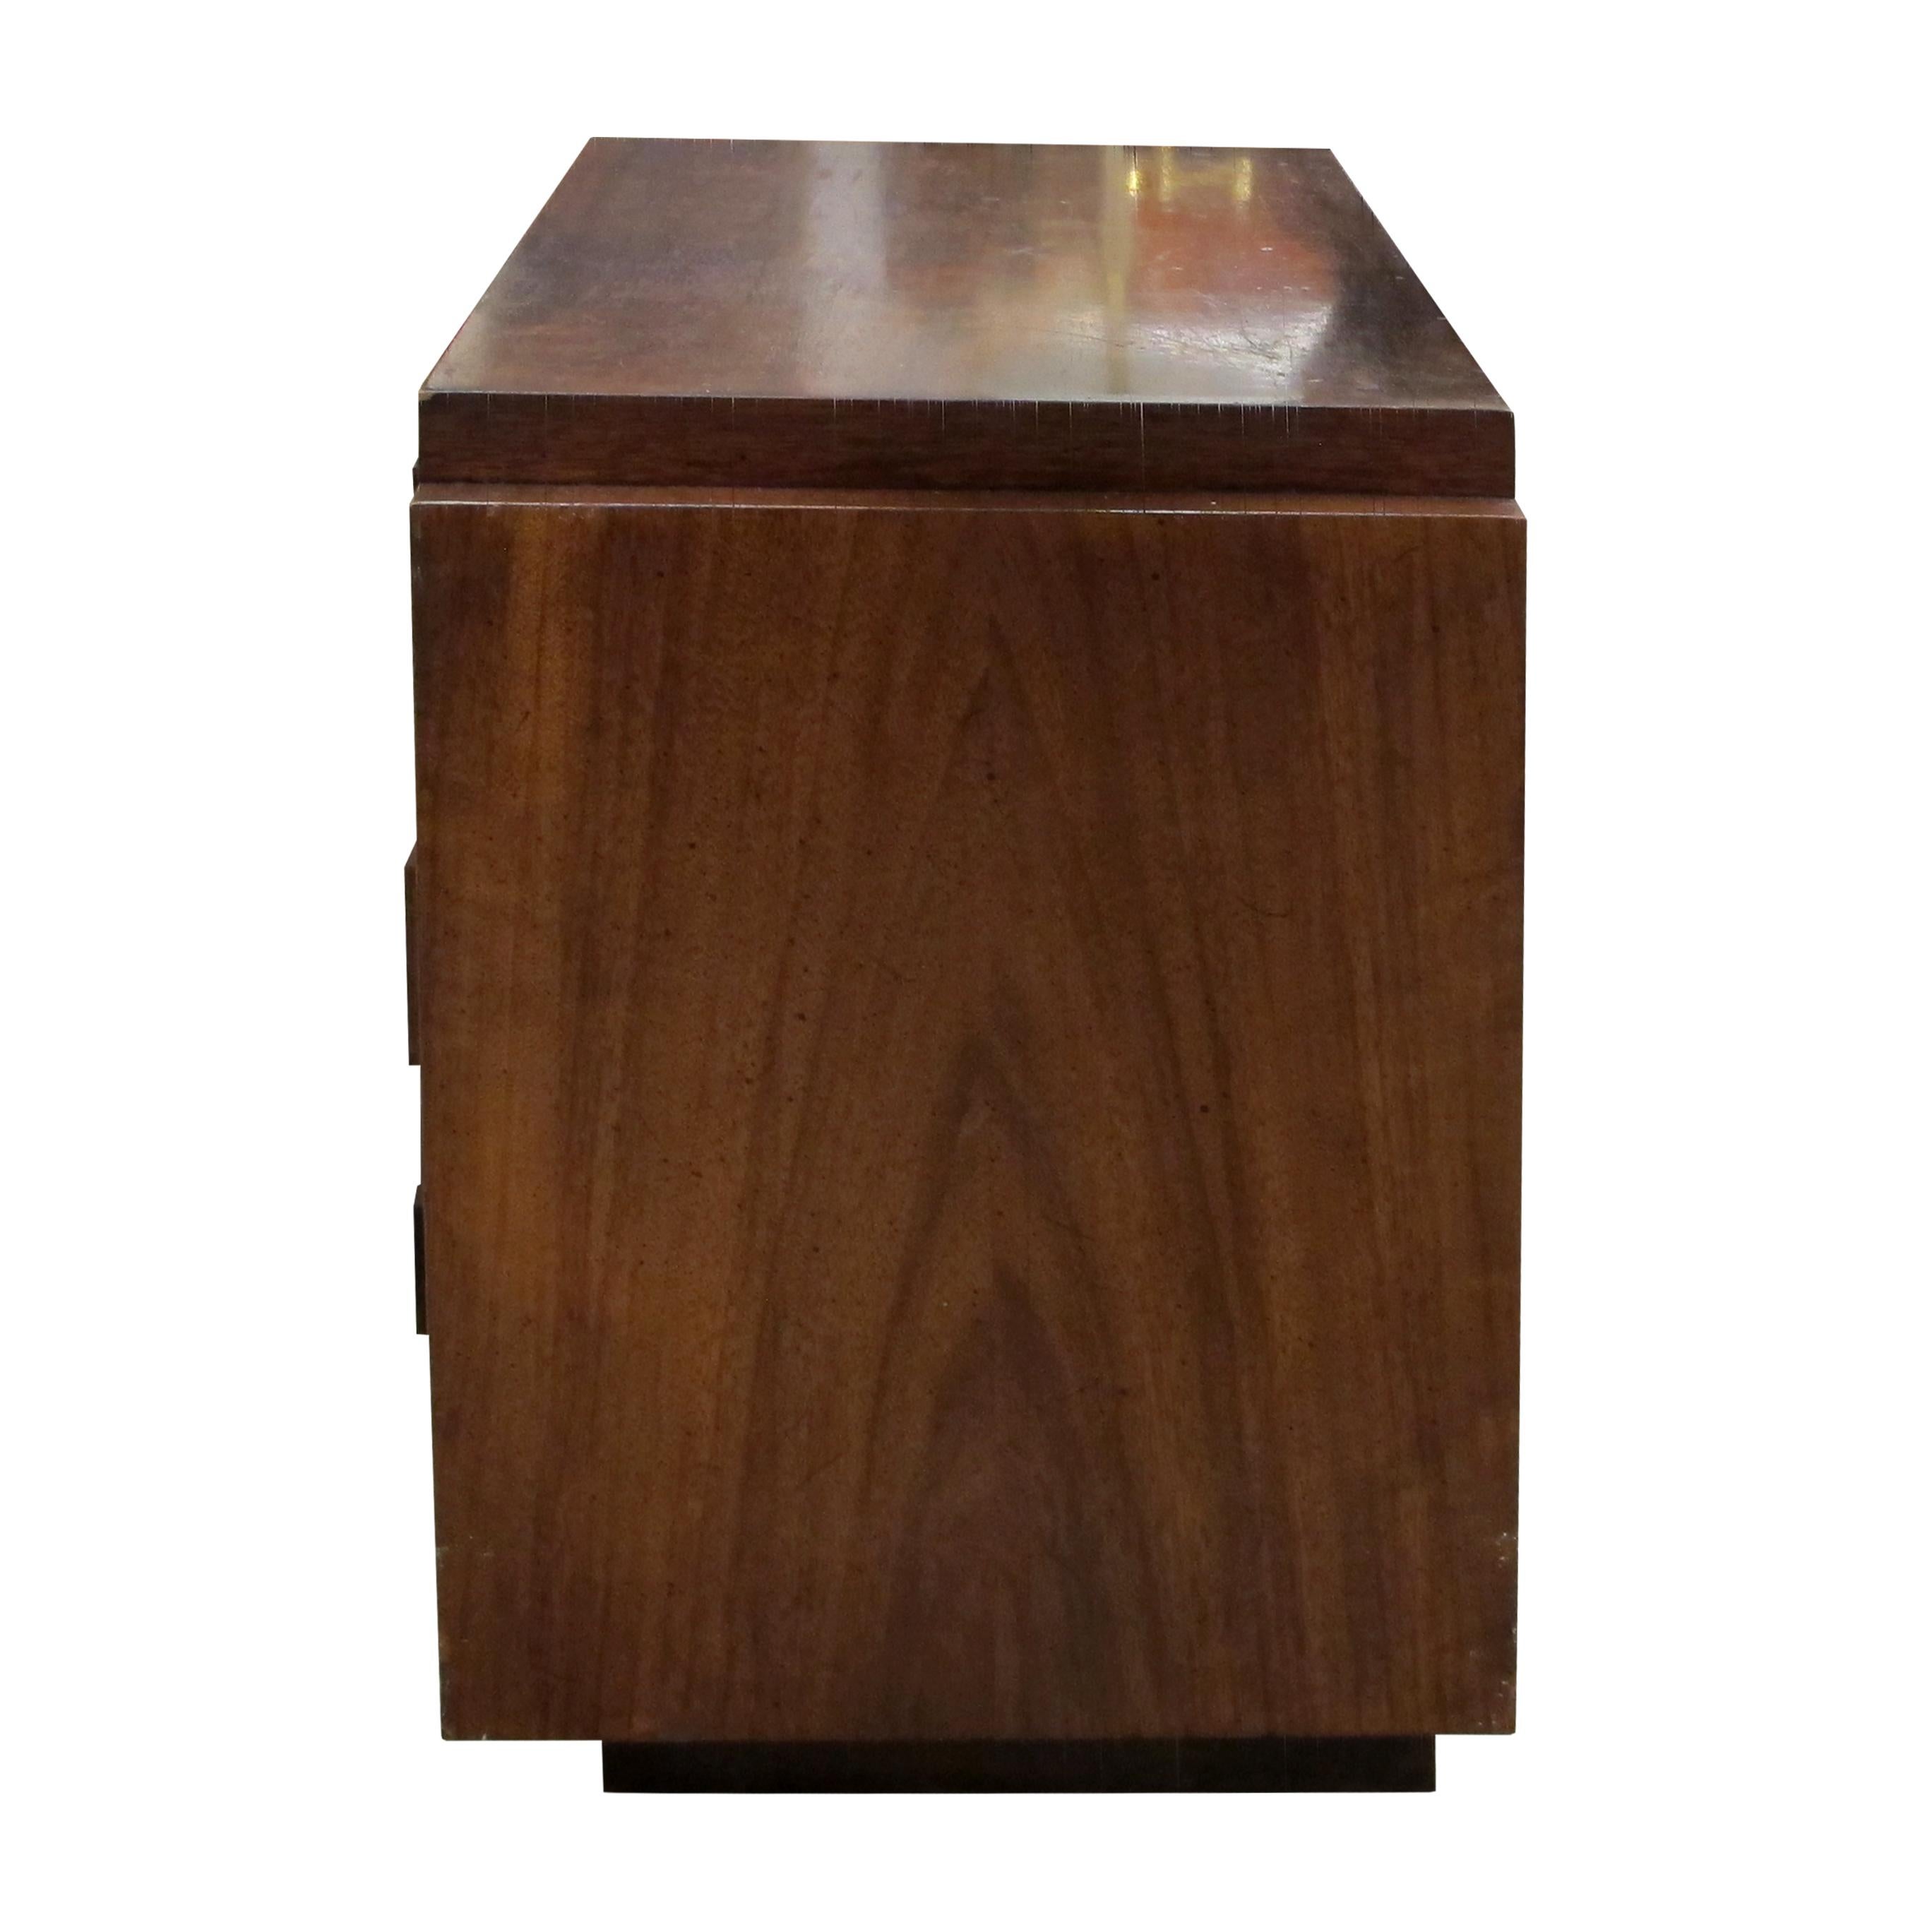 Other 1960S Pair of “Brutalist” Walnut Staccato Paul Evans Bedside/End Tables by Lane For Sale